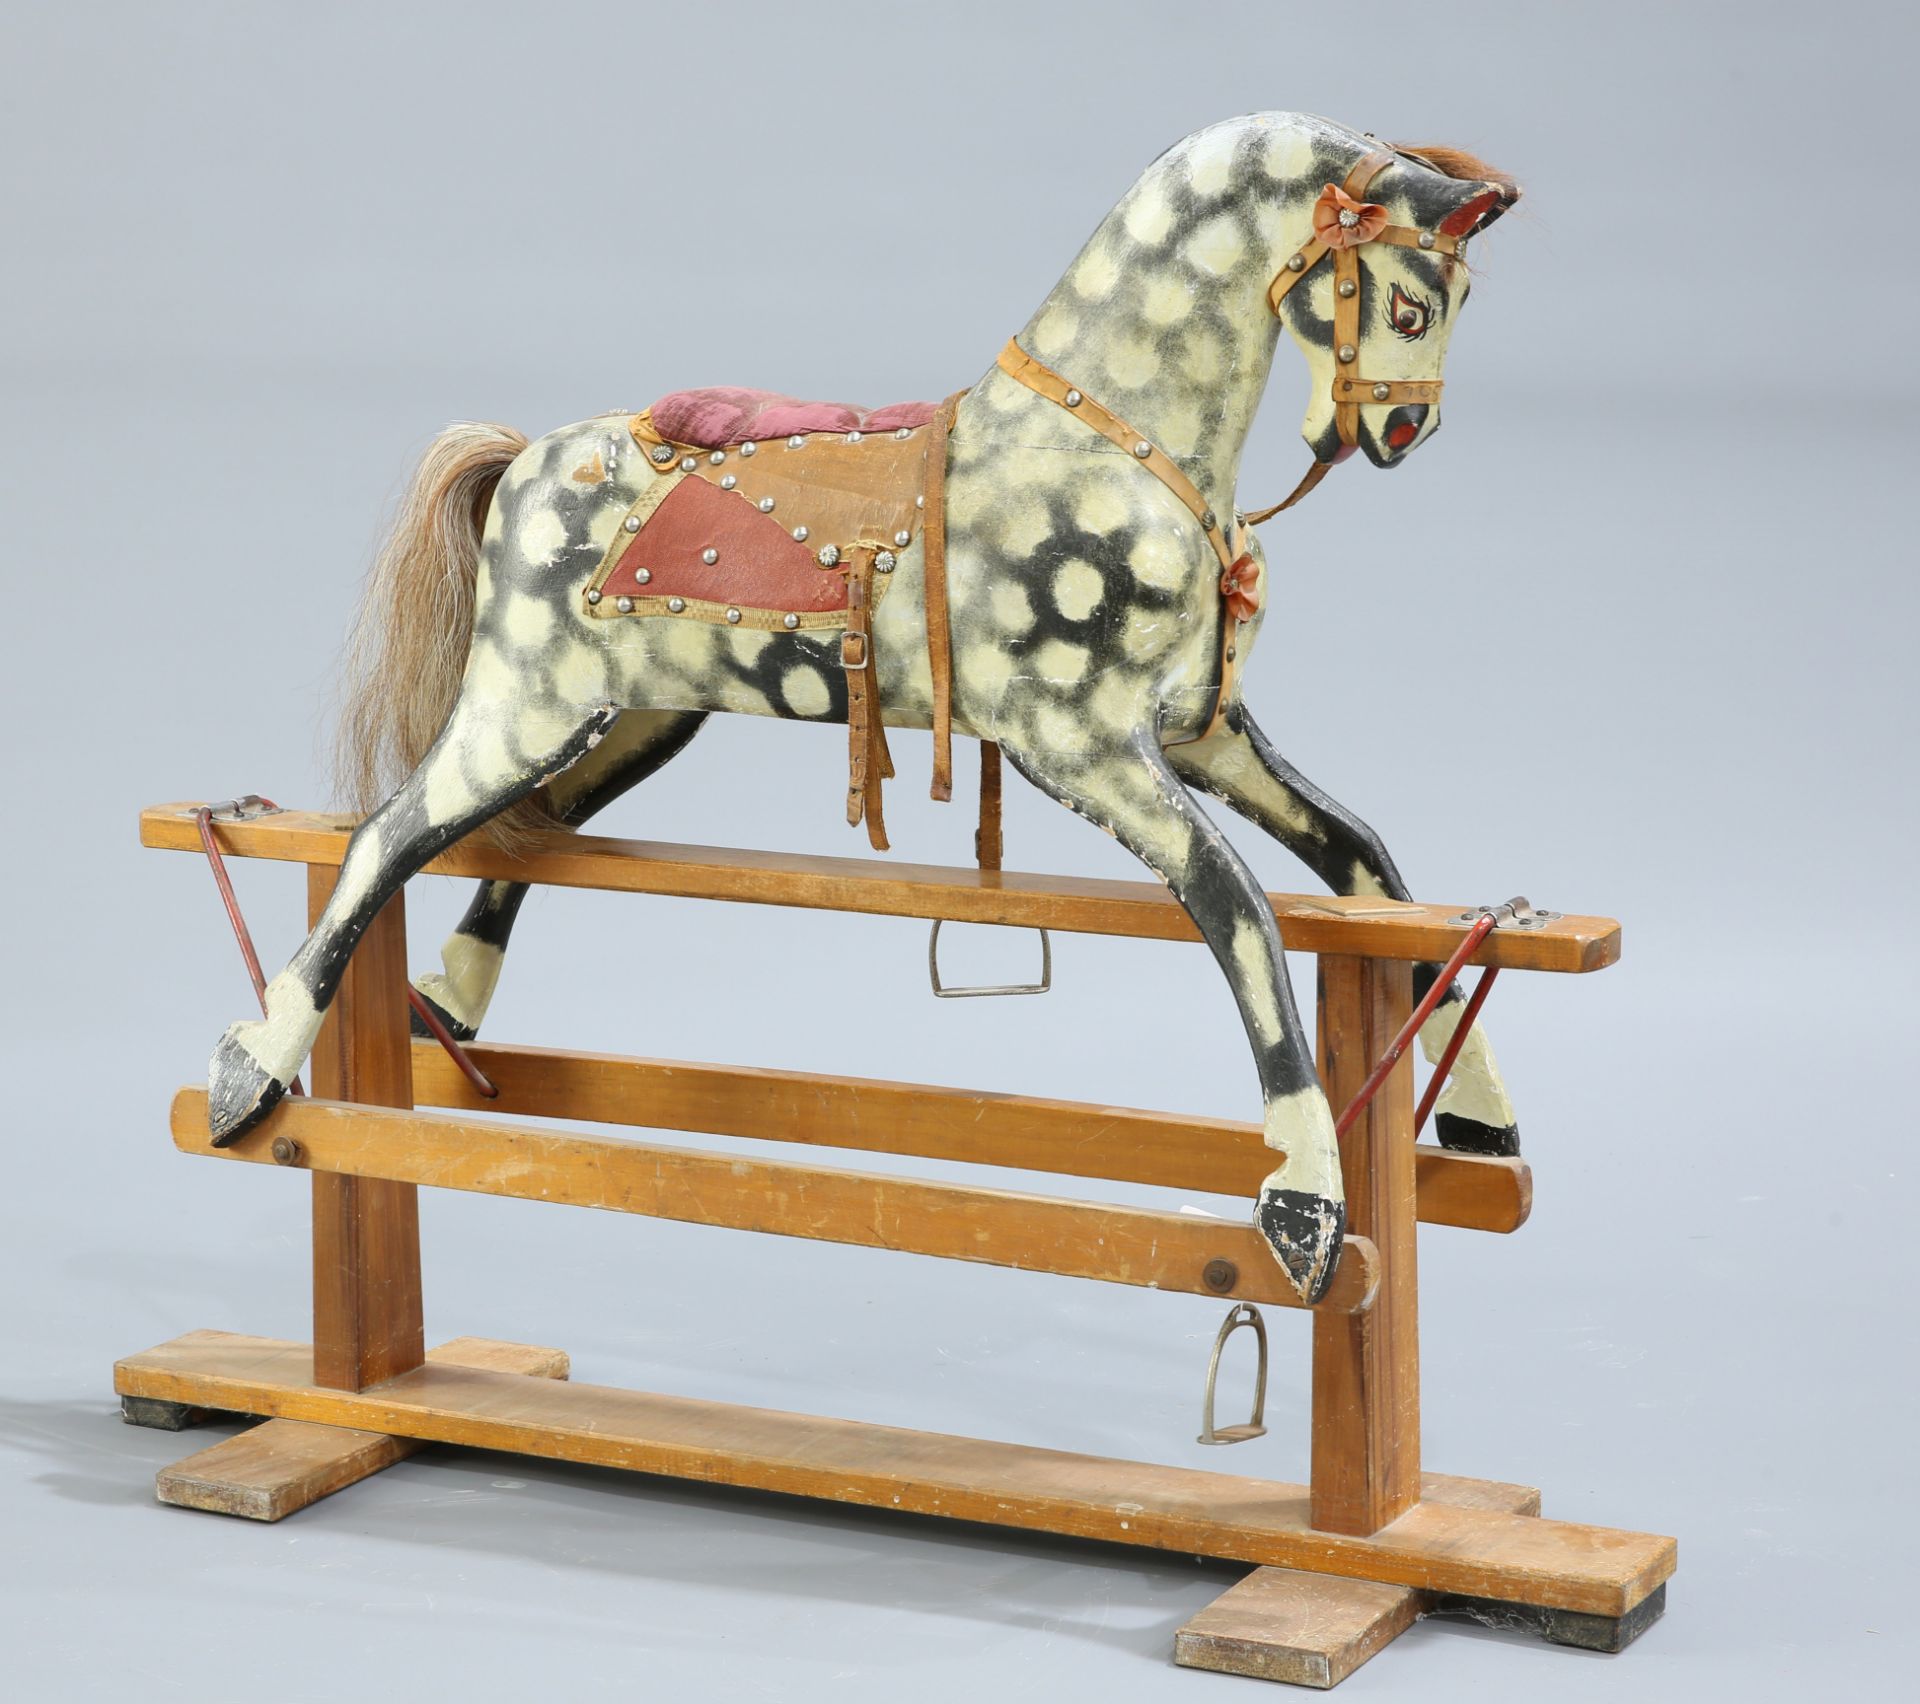 A SMALL PAINTED AND CARVED ROCKING HORSE